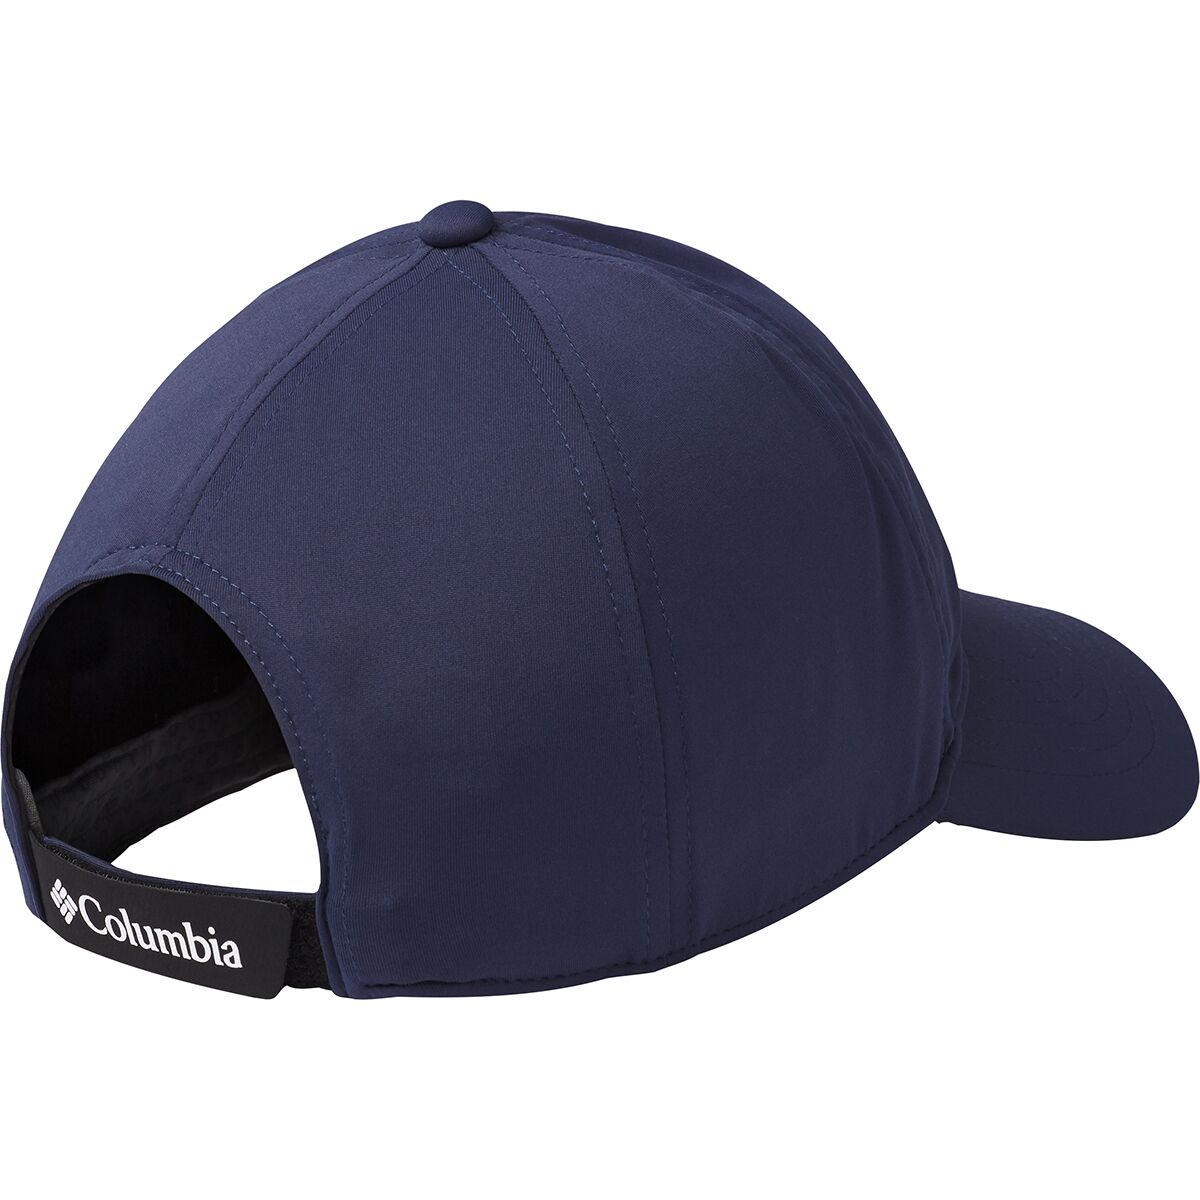 Coolhead II Ball Cap, Size: One size, Nocturnal